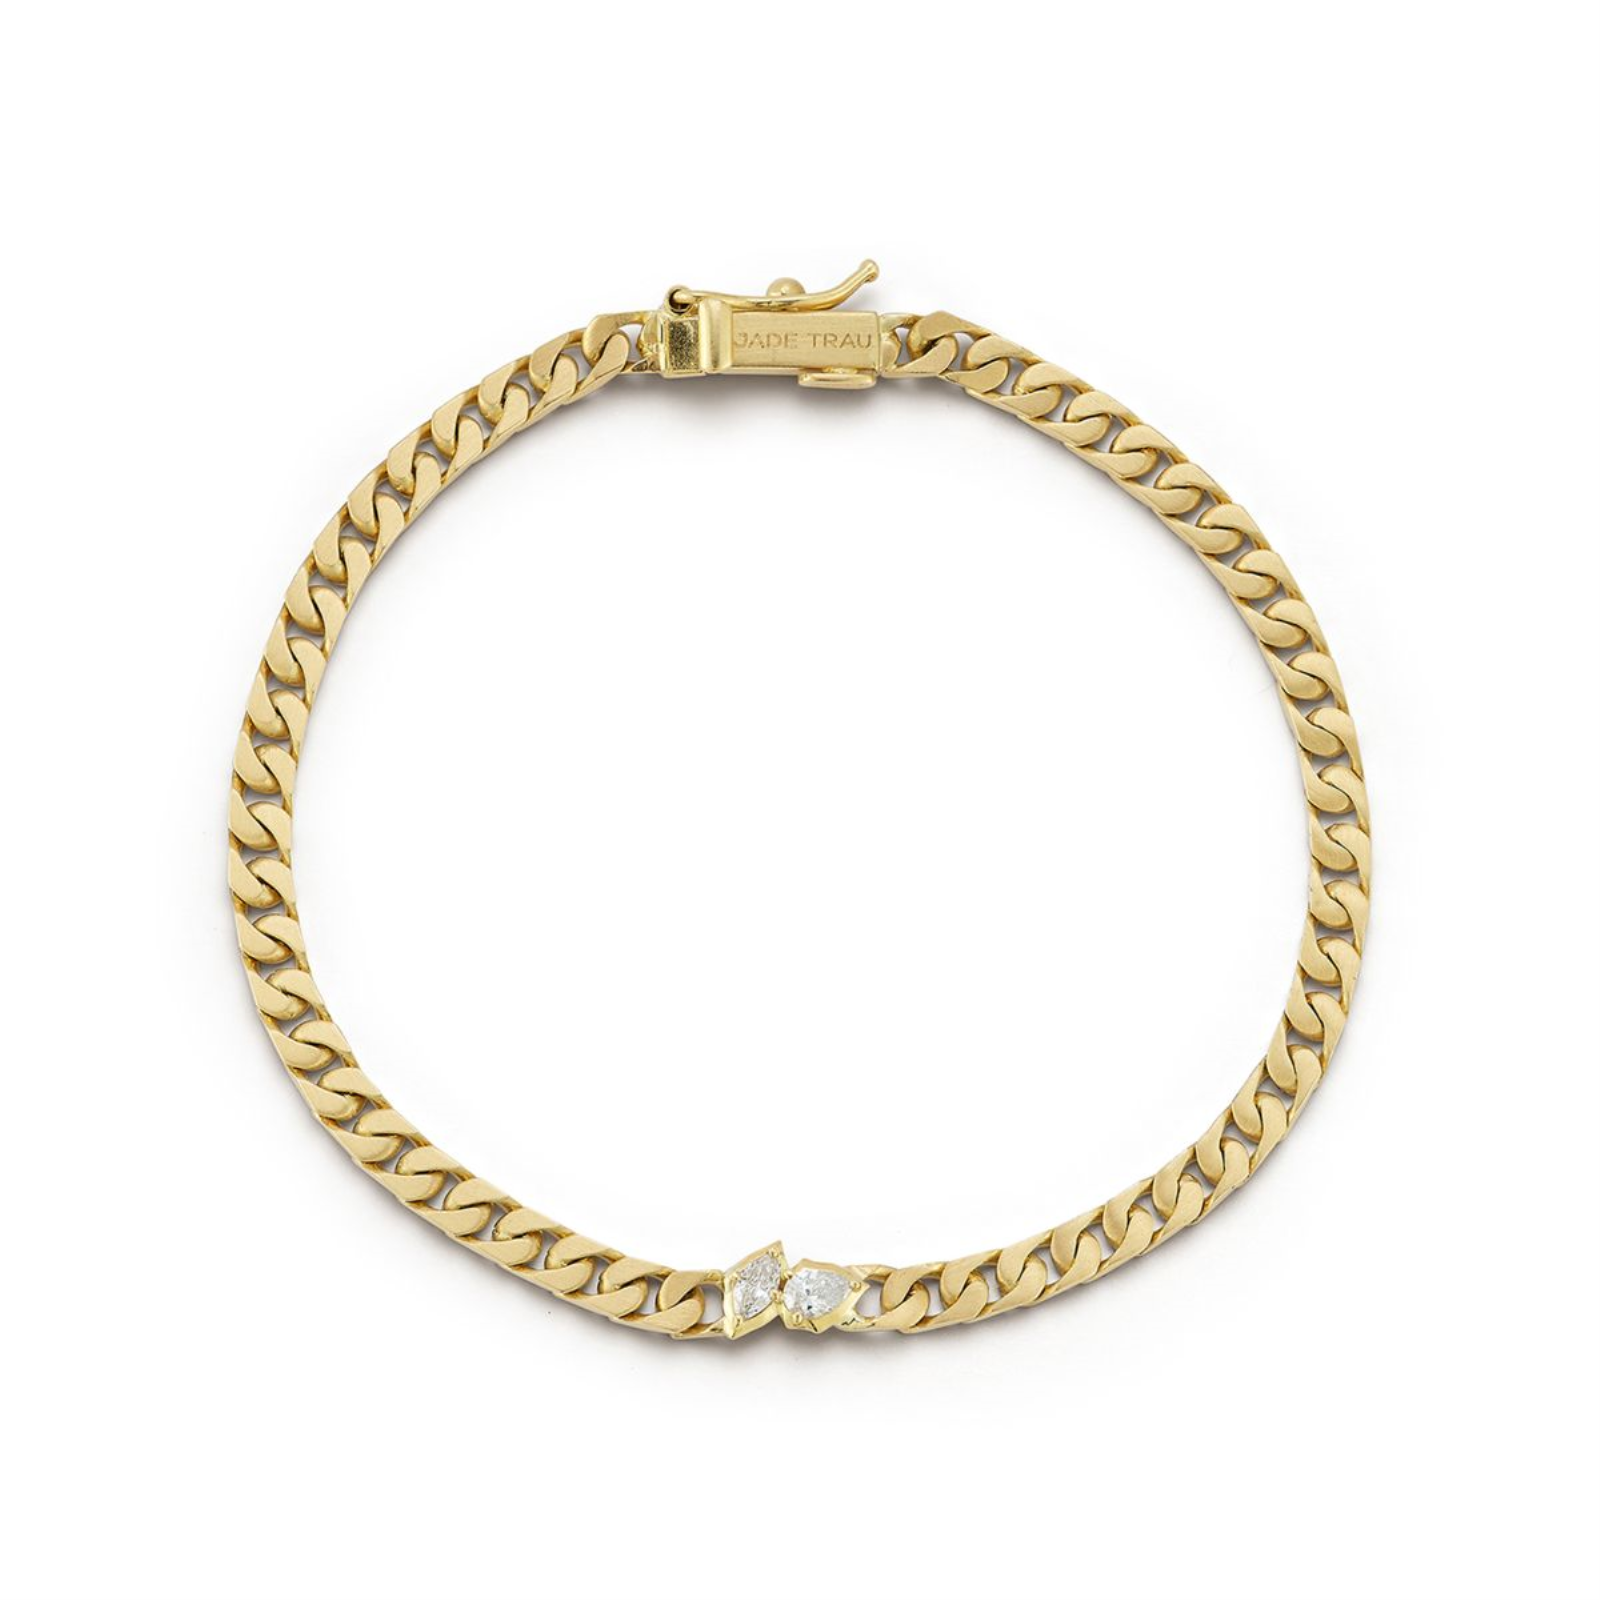 GOLD POSEY CURB CHAIN BRACELET